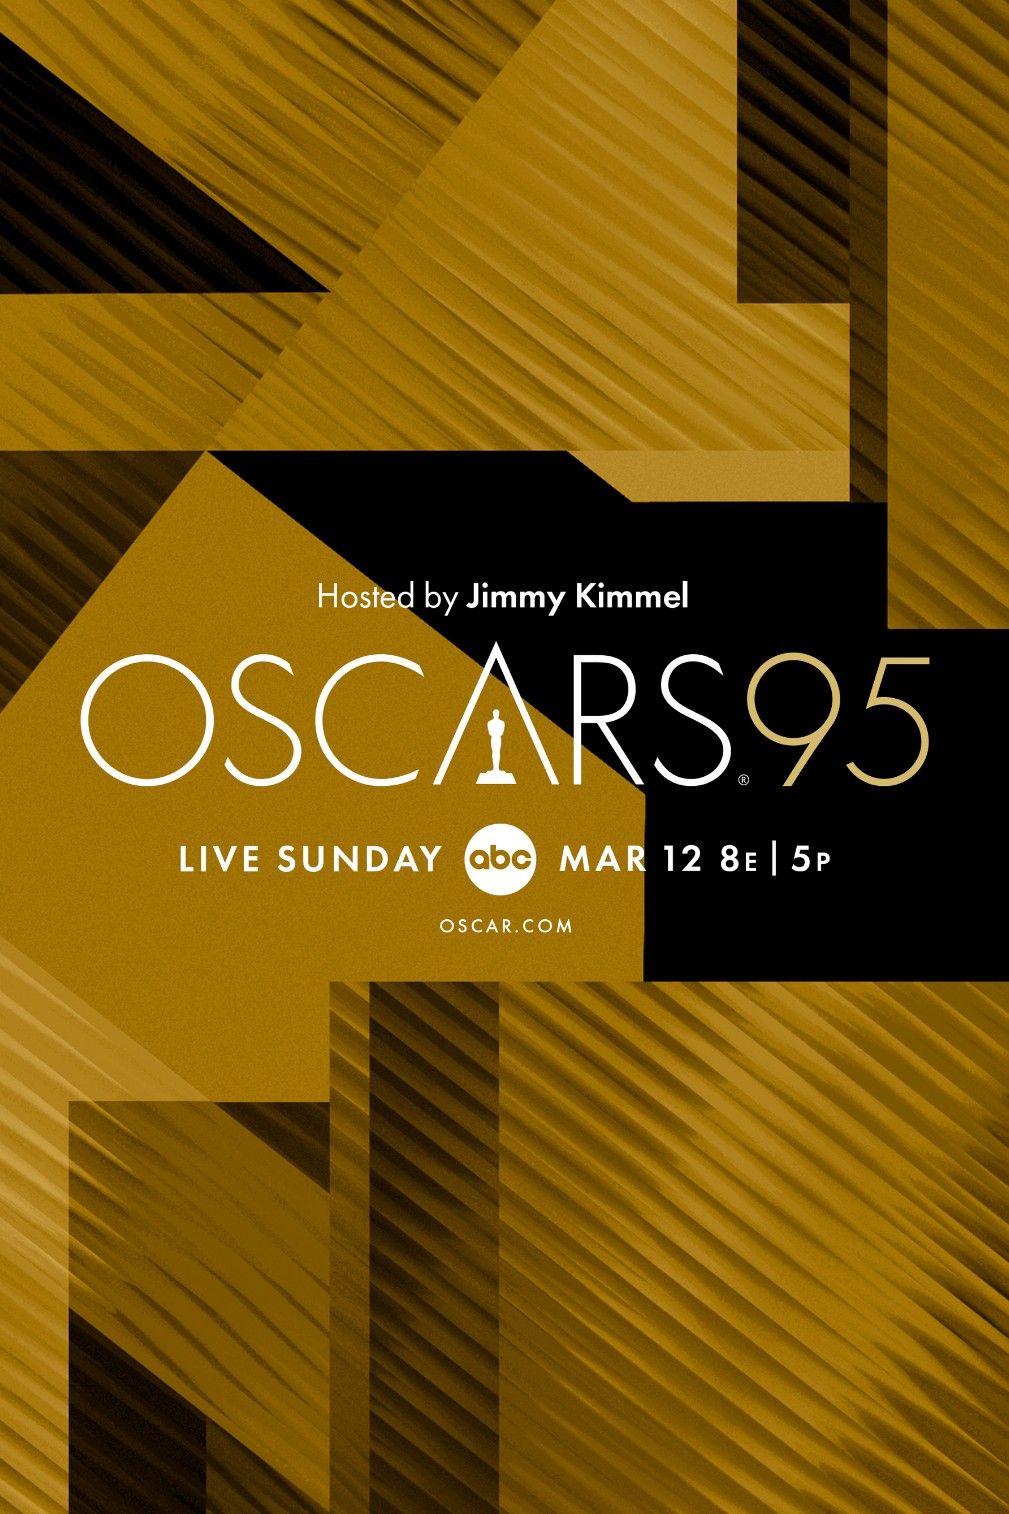 The Oscars 95 Poster